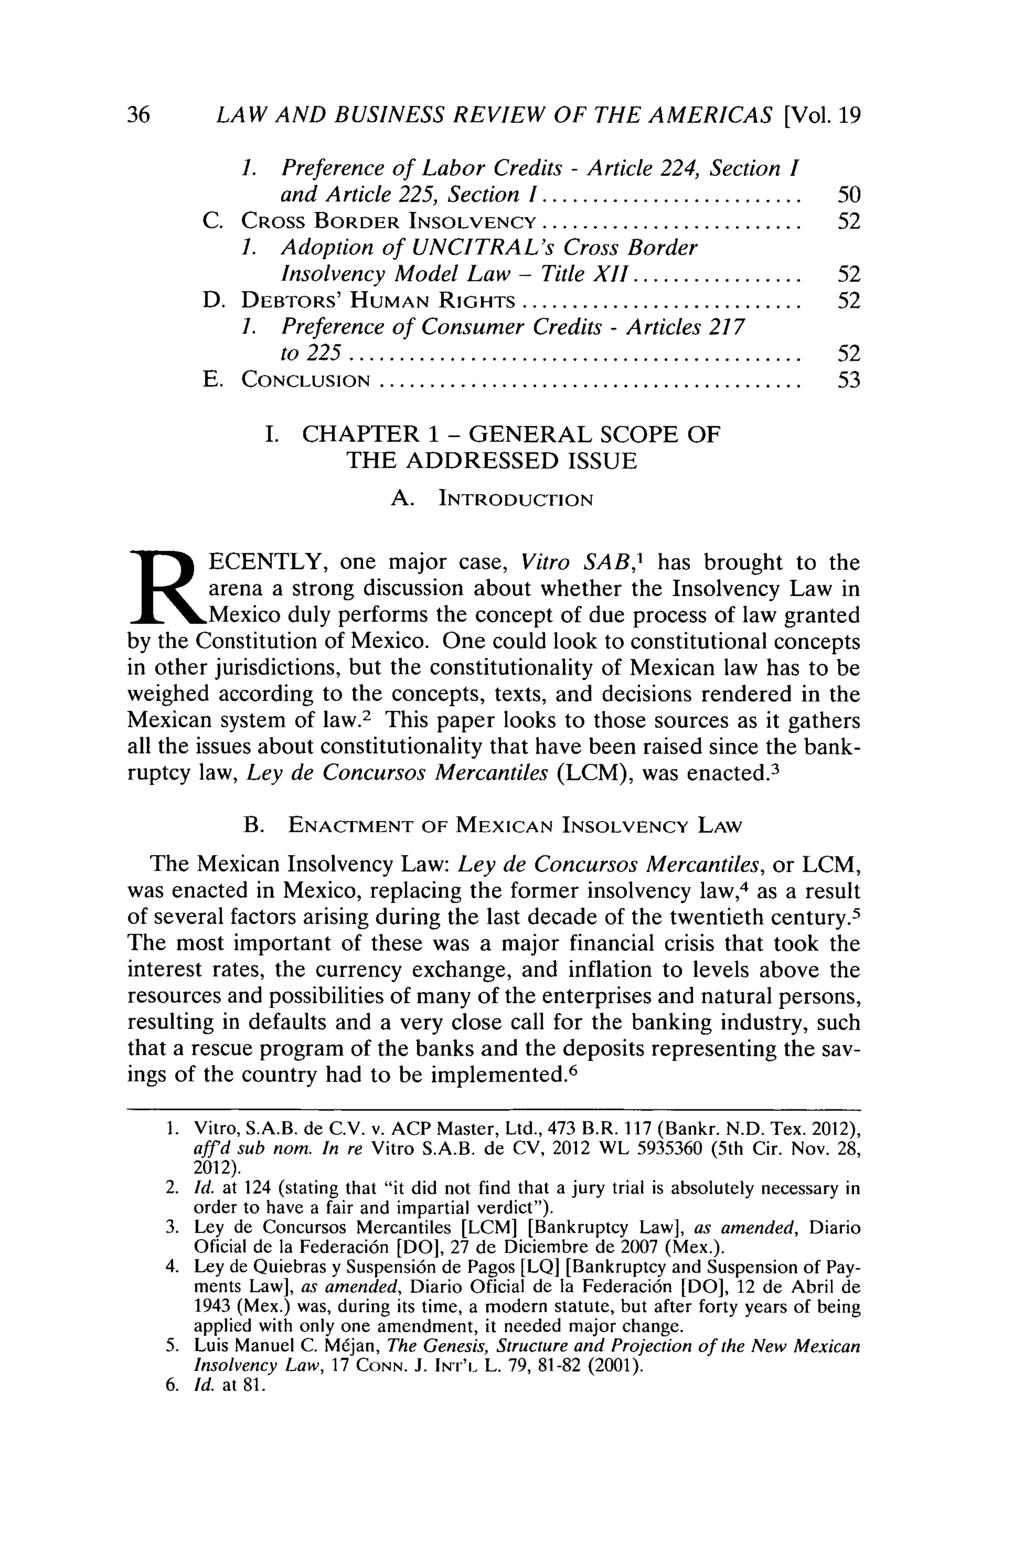 36 LAW AND BUSINESS REVIEW OF THE AMERICAS [Vol. 19 1. Preference of Labor Credits - Article 224, Section I and Article 225, Section I...... 50 C. CROSS BORDER INSOLVENCY... 52 1.